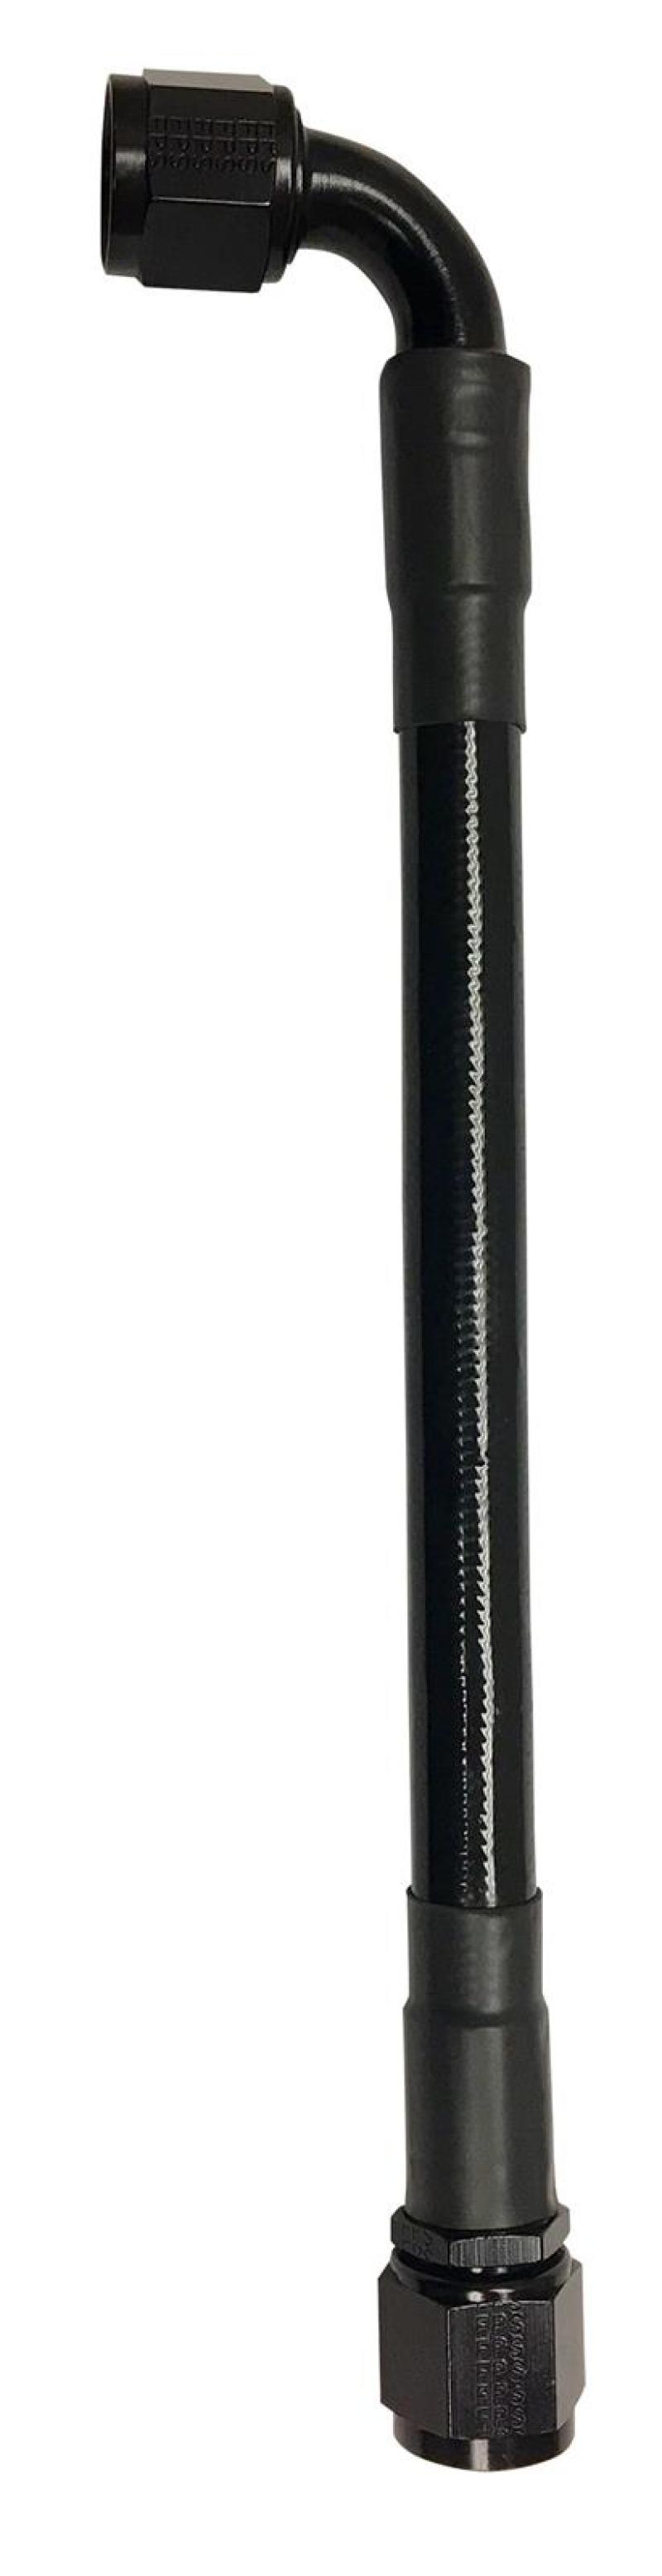 Fragola -10AN Ext Black PTFE Hose Assembly Straight x 90 Degree 10in - 6029-1-2-10BL